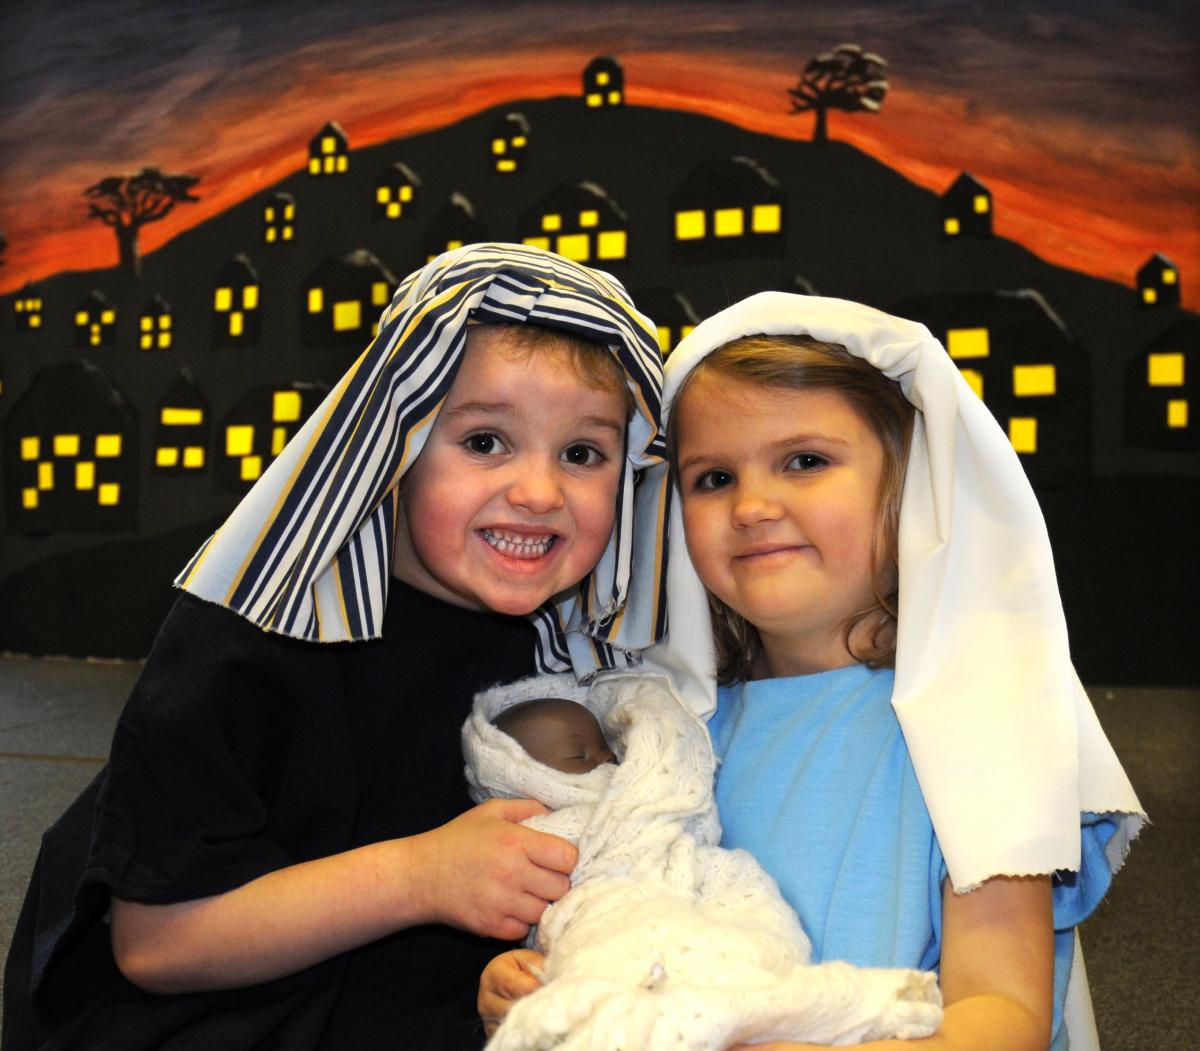 Appearing in Burley Woodhead Primary School Nativity were Eloise Wood and Louis Shankland